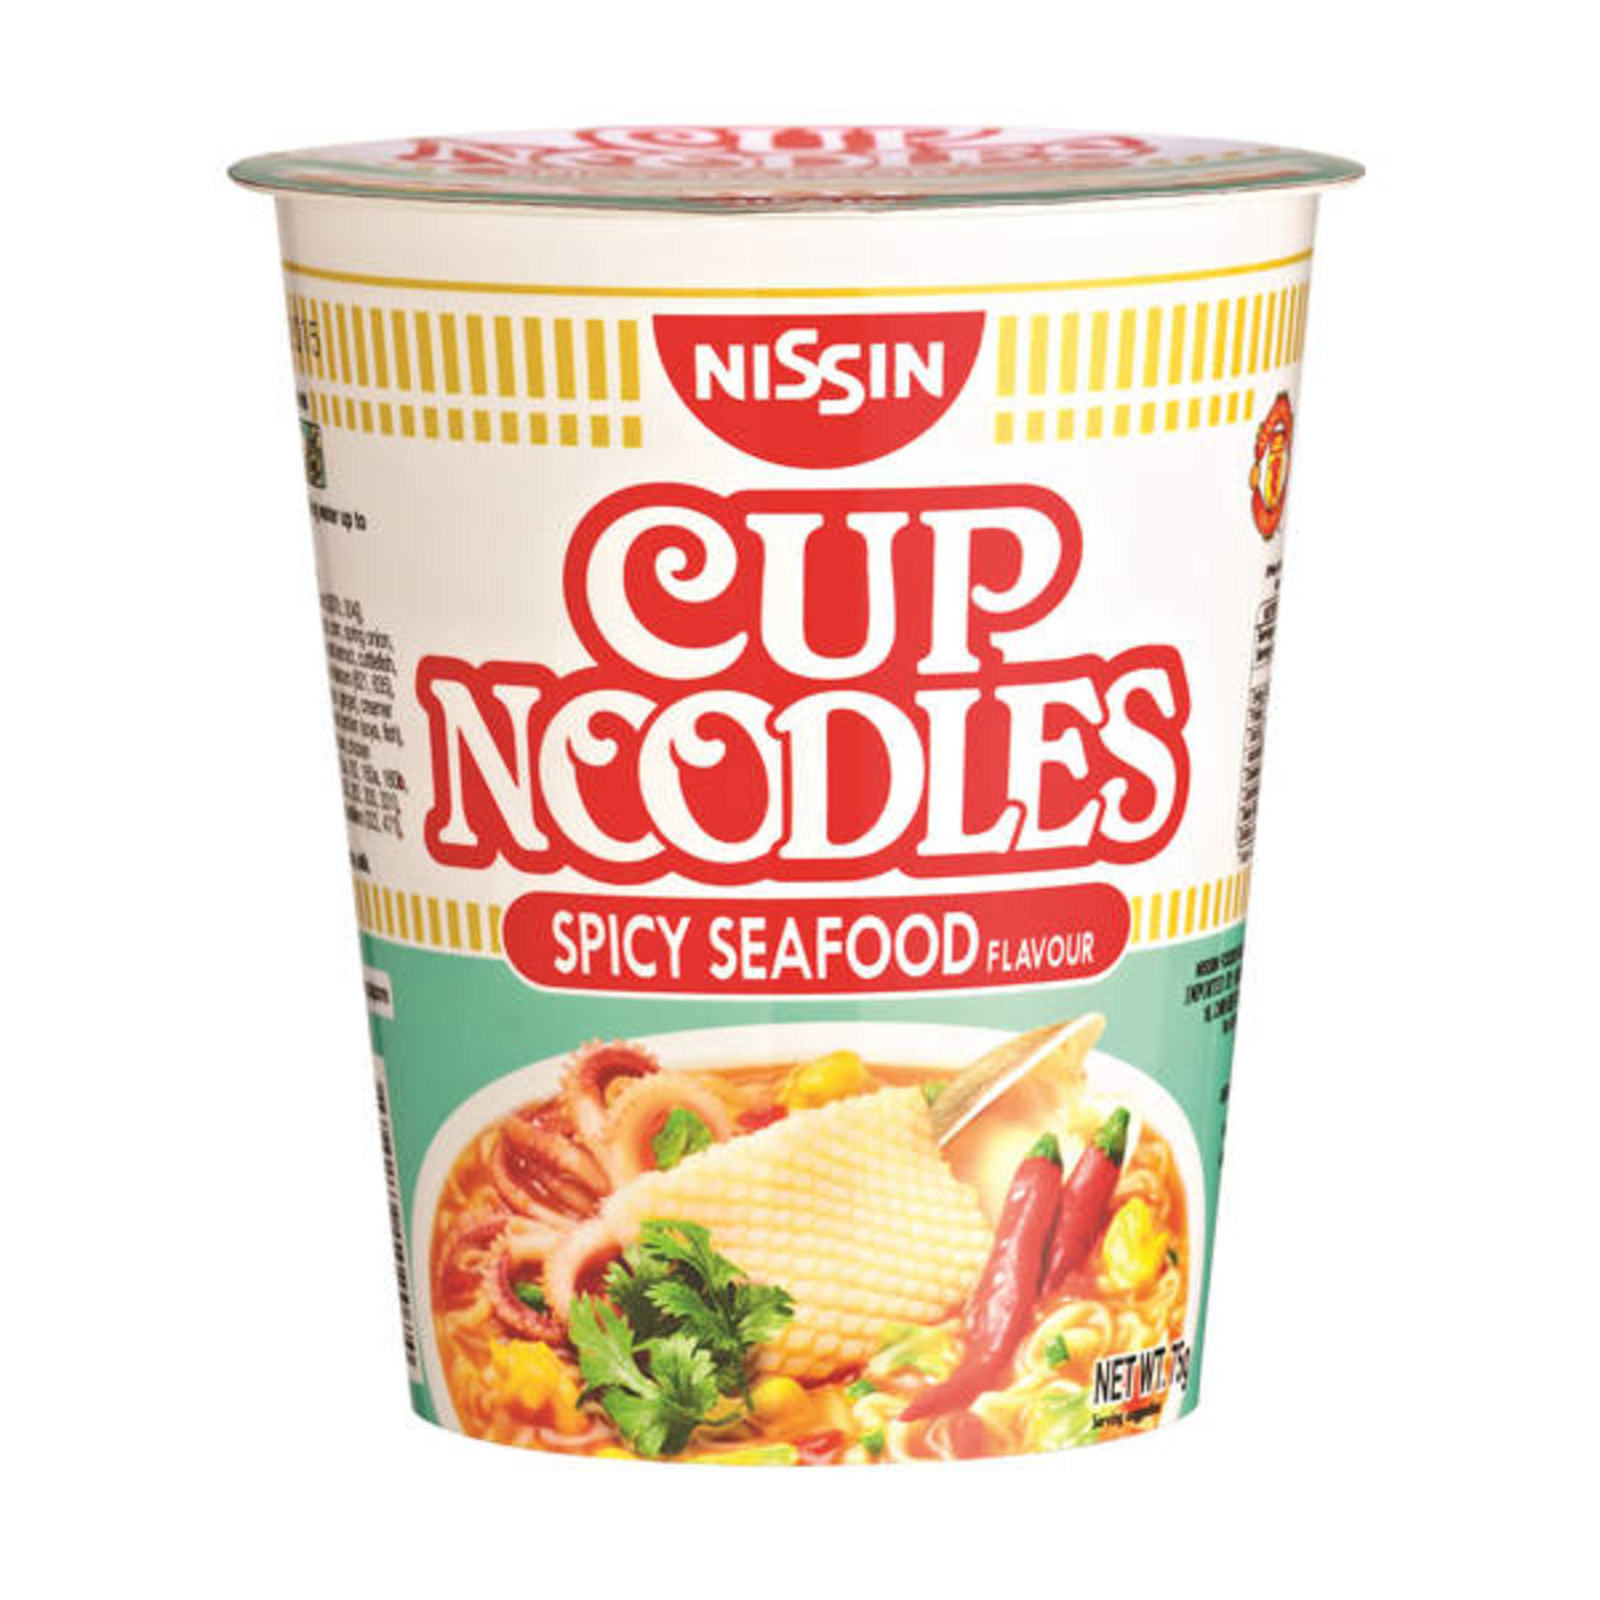 Nissin Instant Cup Noodles - Spicy Seafood